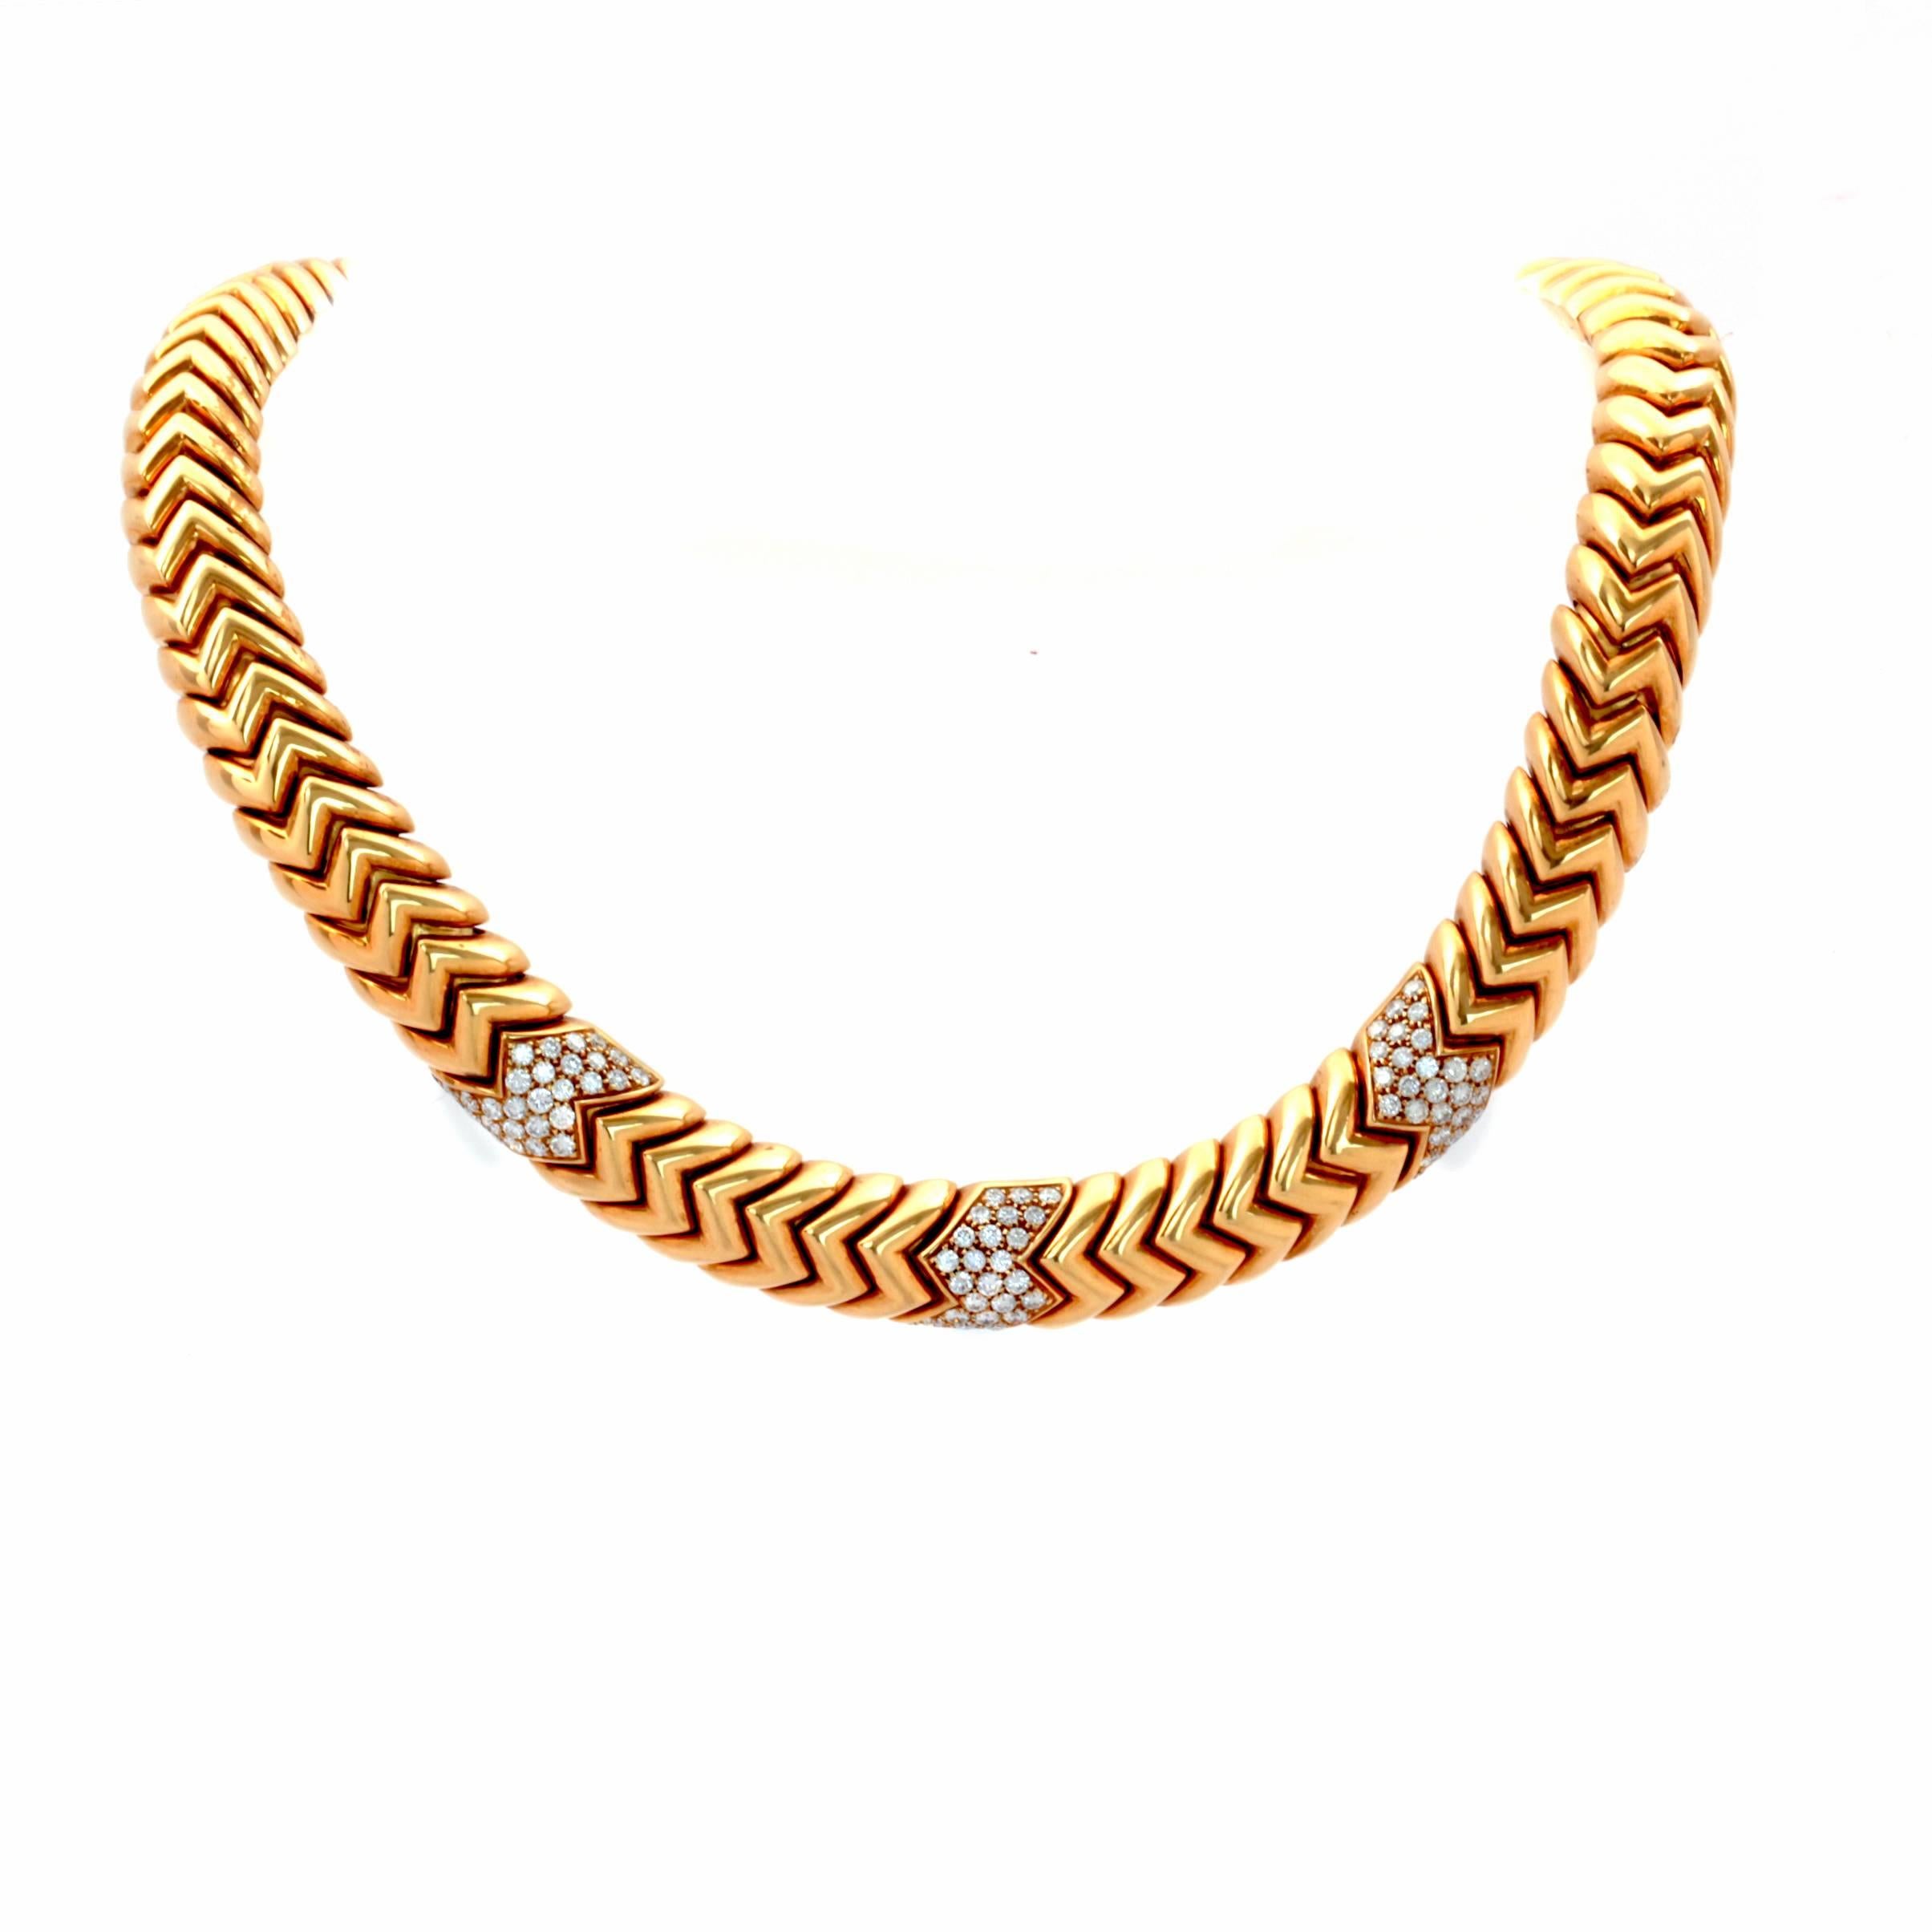 This diamond necklace by Bvlgari crafted in solid 18K yellow gold, from the Spiga Collection. 

The necklace showcases an exquisite series of gold zig-zag chevron links, embellished with 81 genuine Round cut Dazzling Diamonds approx: 4.05cttw, F-G